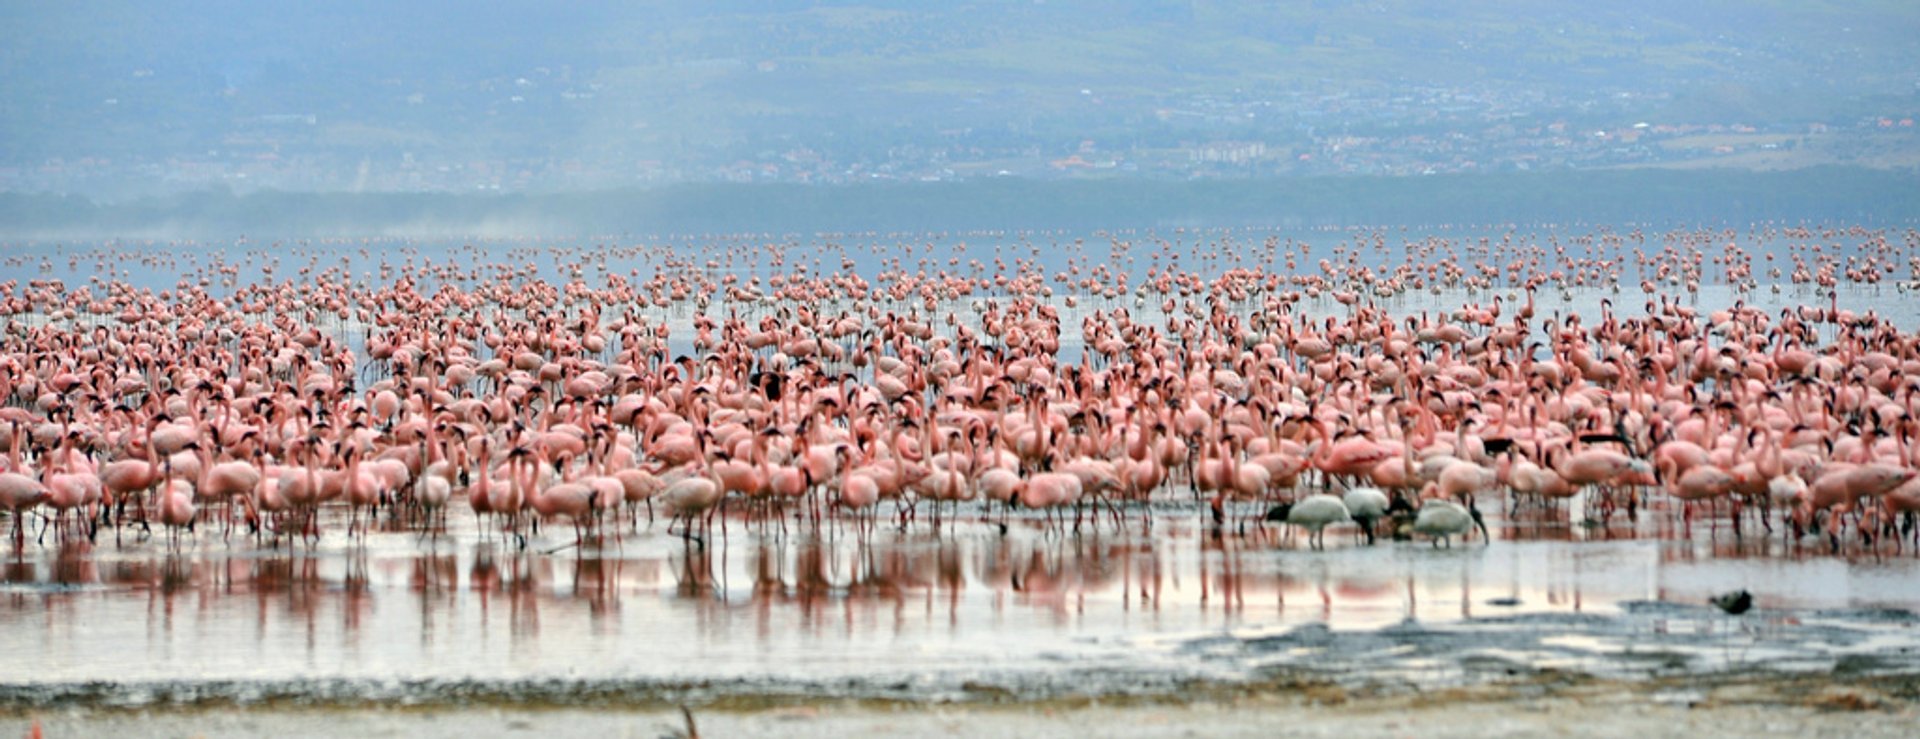 Best time to see Flamingos